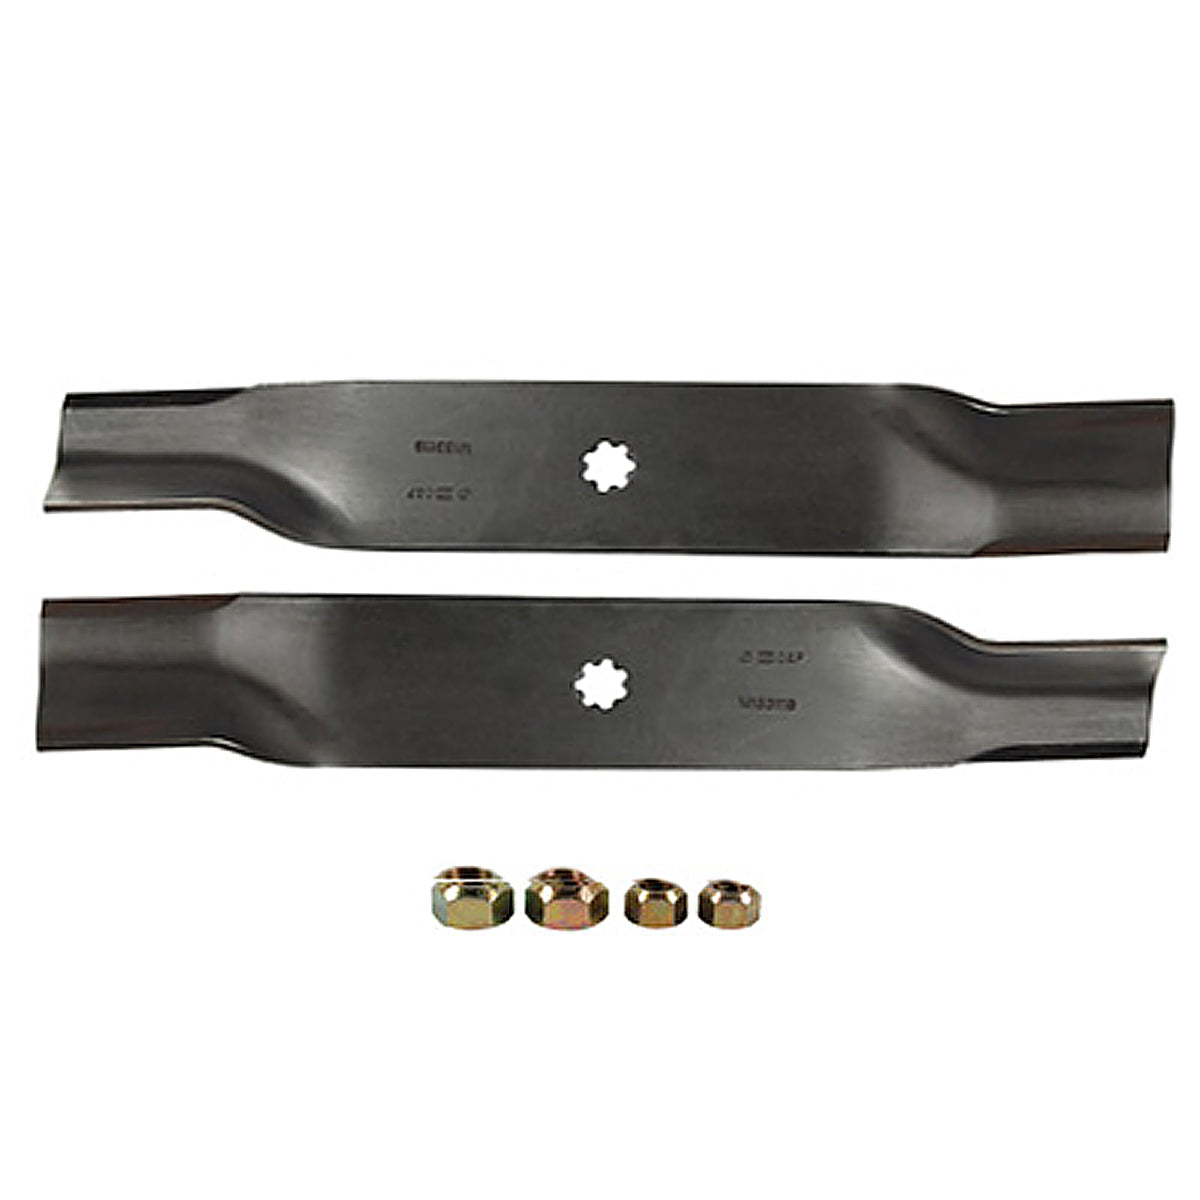 John Deere Mower Blade ( Standard ) For 300, GT, GX, LT, LX, Select, and Front-Mount Series with 38" Deck - Nelson Motors & Equipment